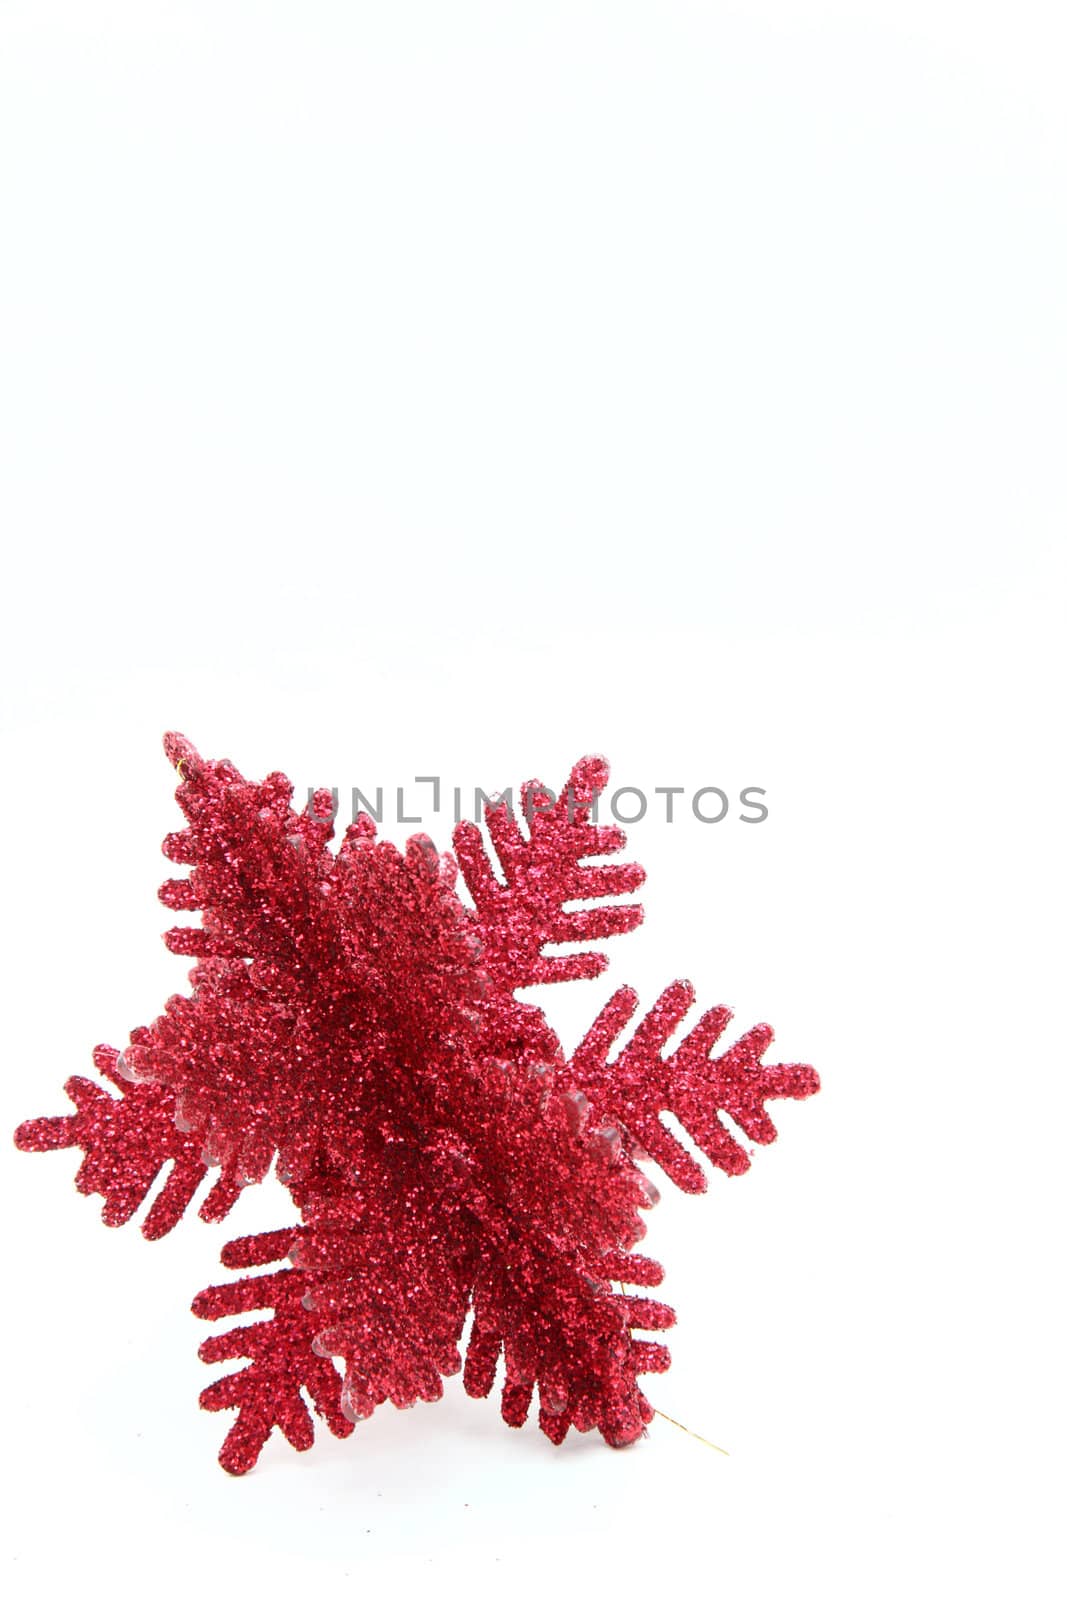 Red christmas snowflake ornament isolated on white